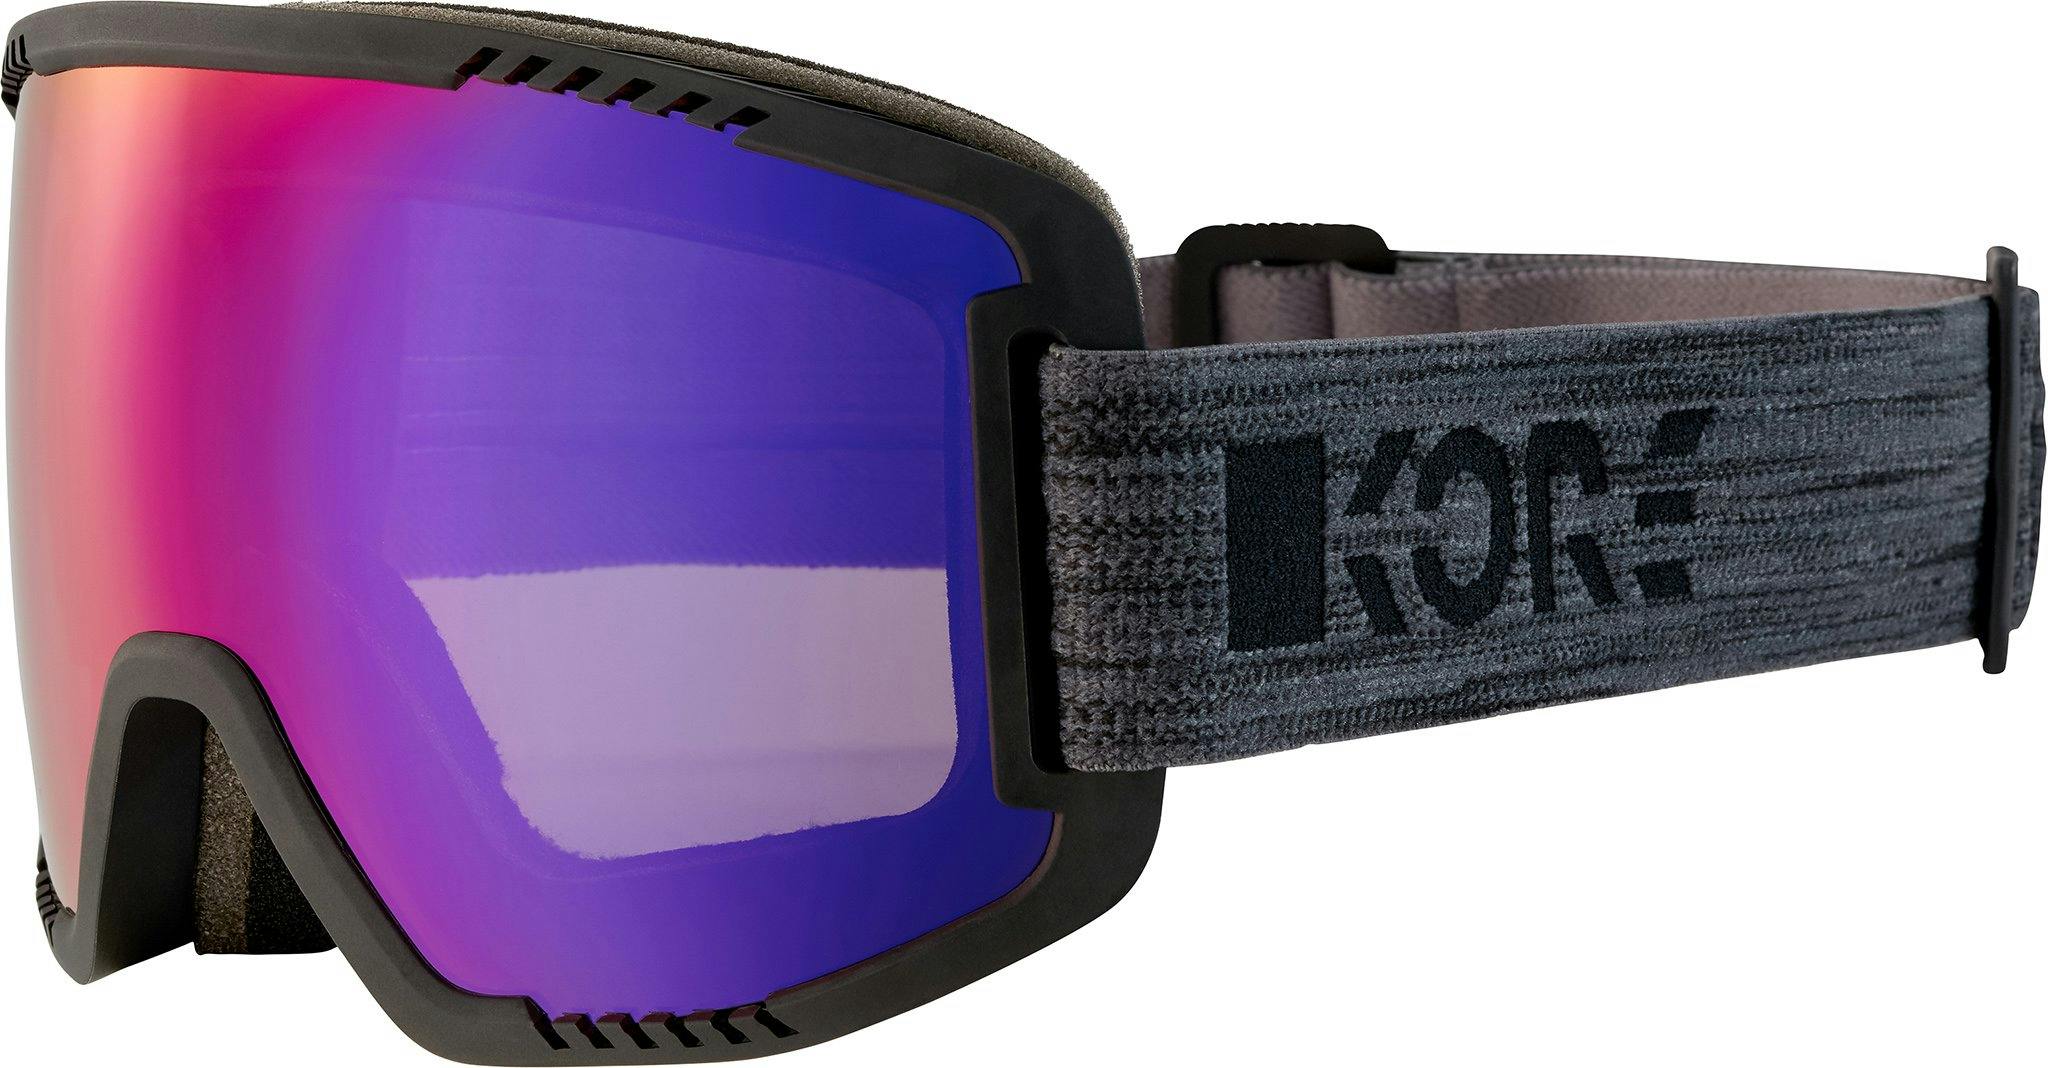 Product image for Contex Pro WCR 5K Goggles - Unisex